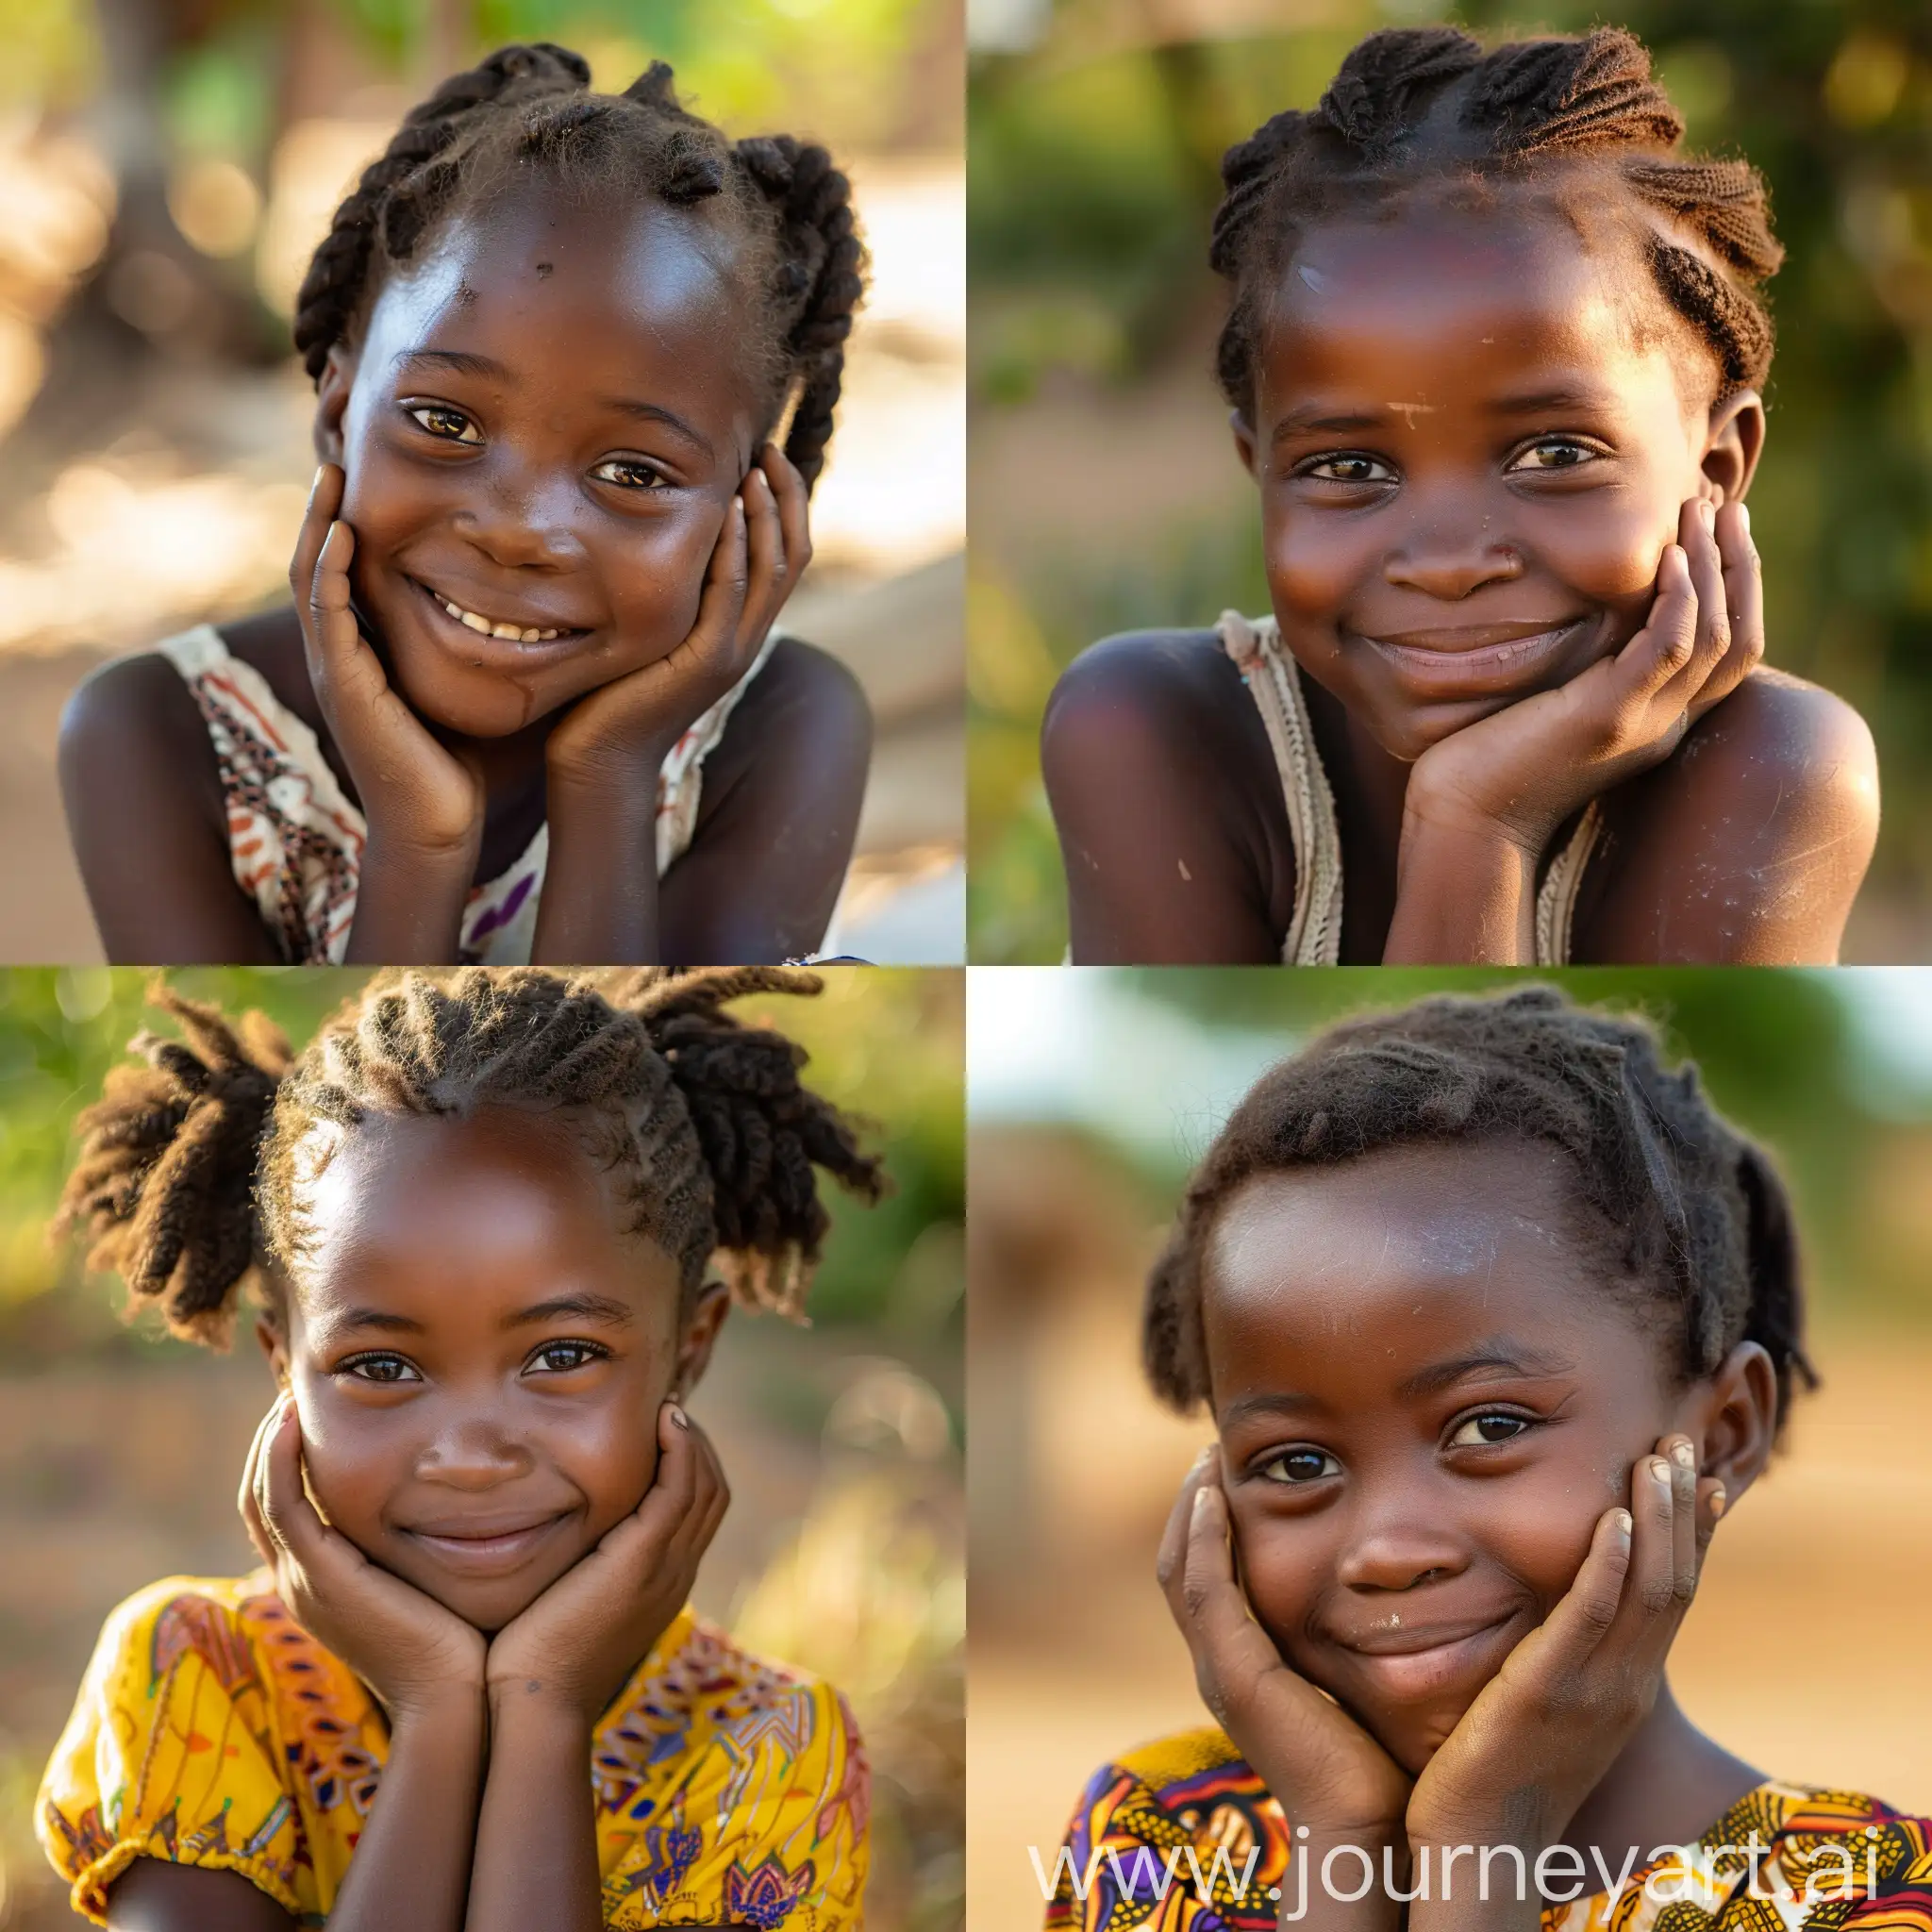 Joyful-African-Young-Girl-Smiling-on-Sunny-Day